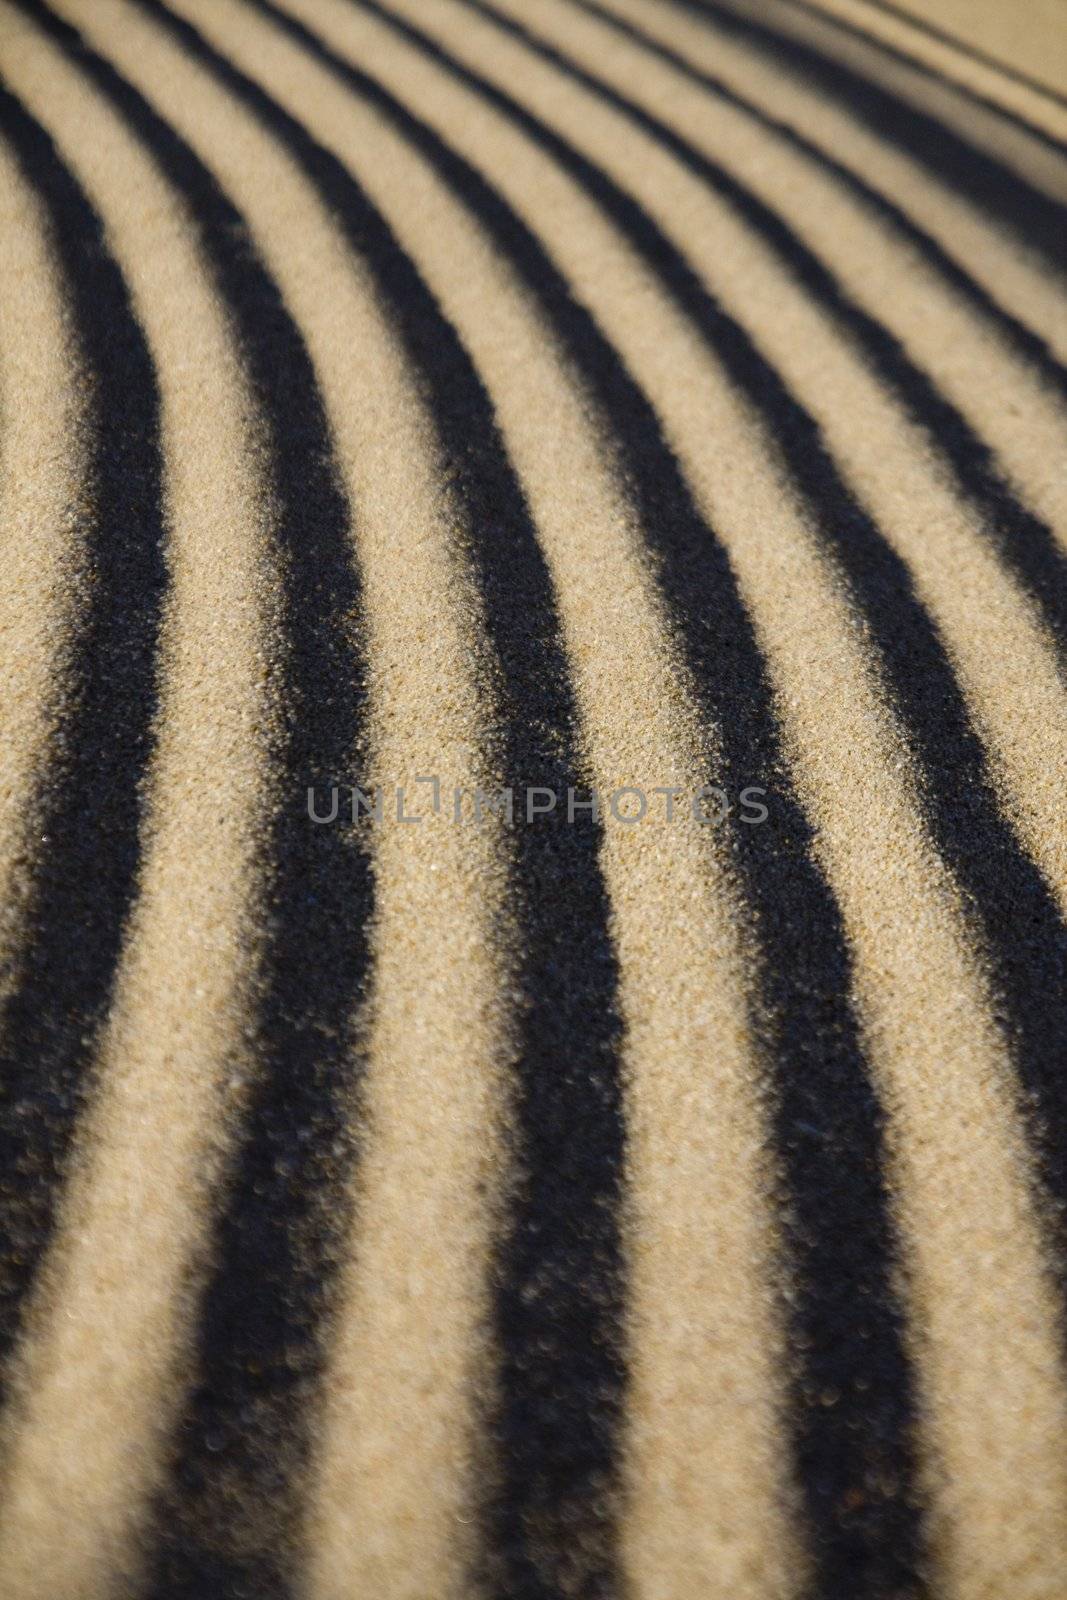 Close up view of the detail of some ripples on sand.